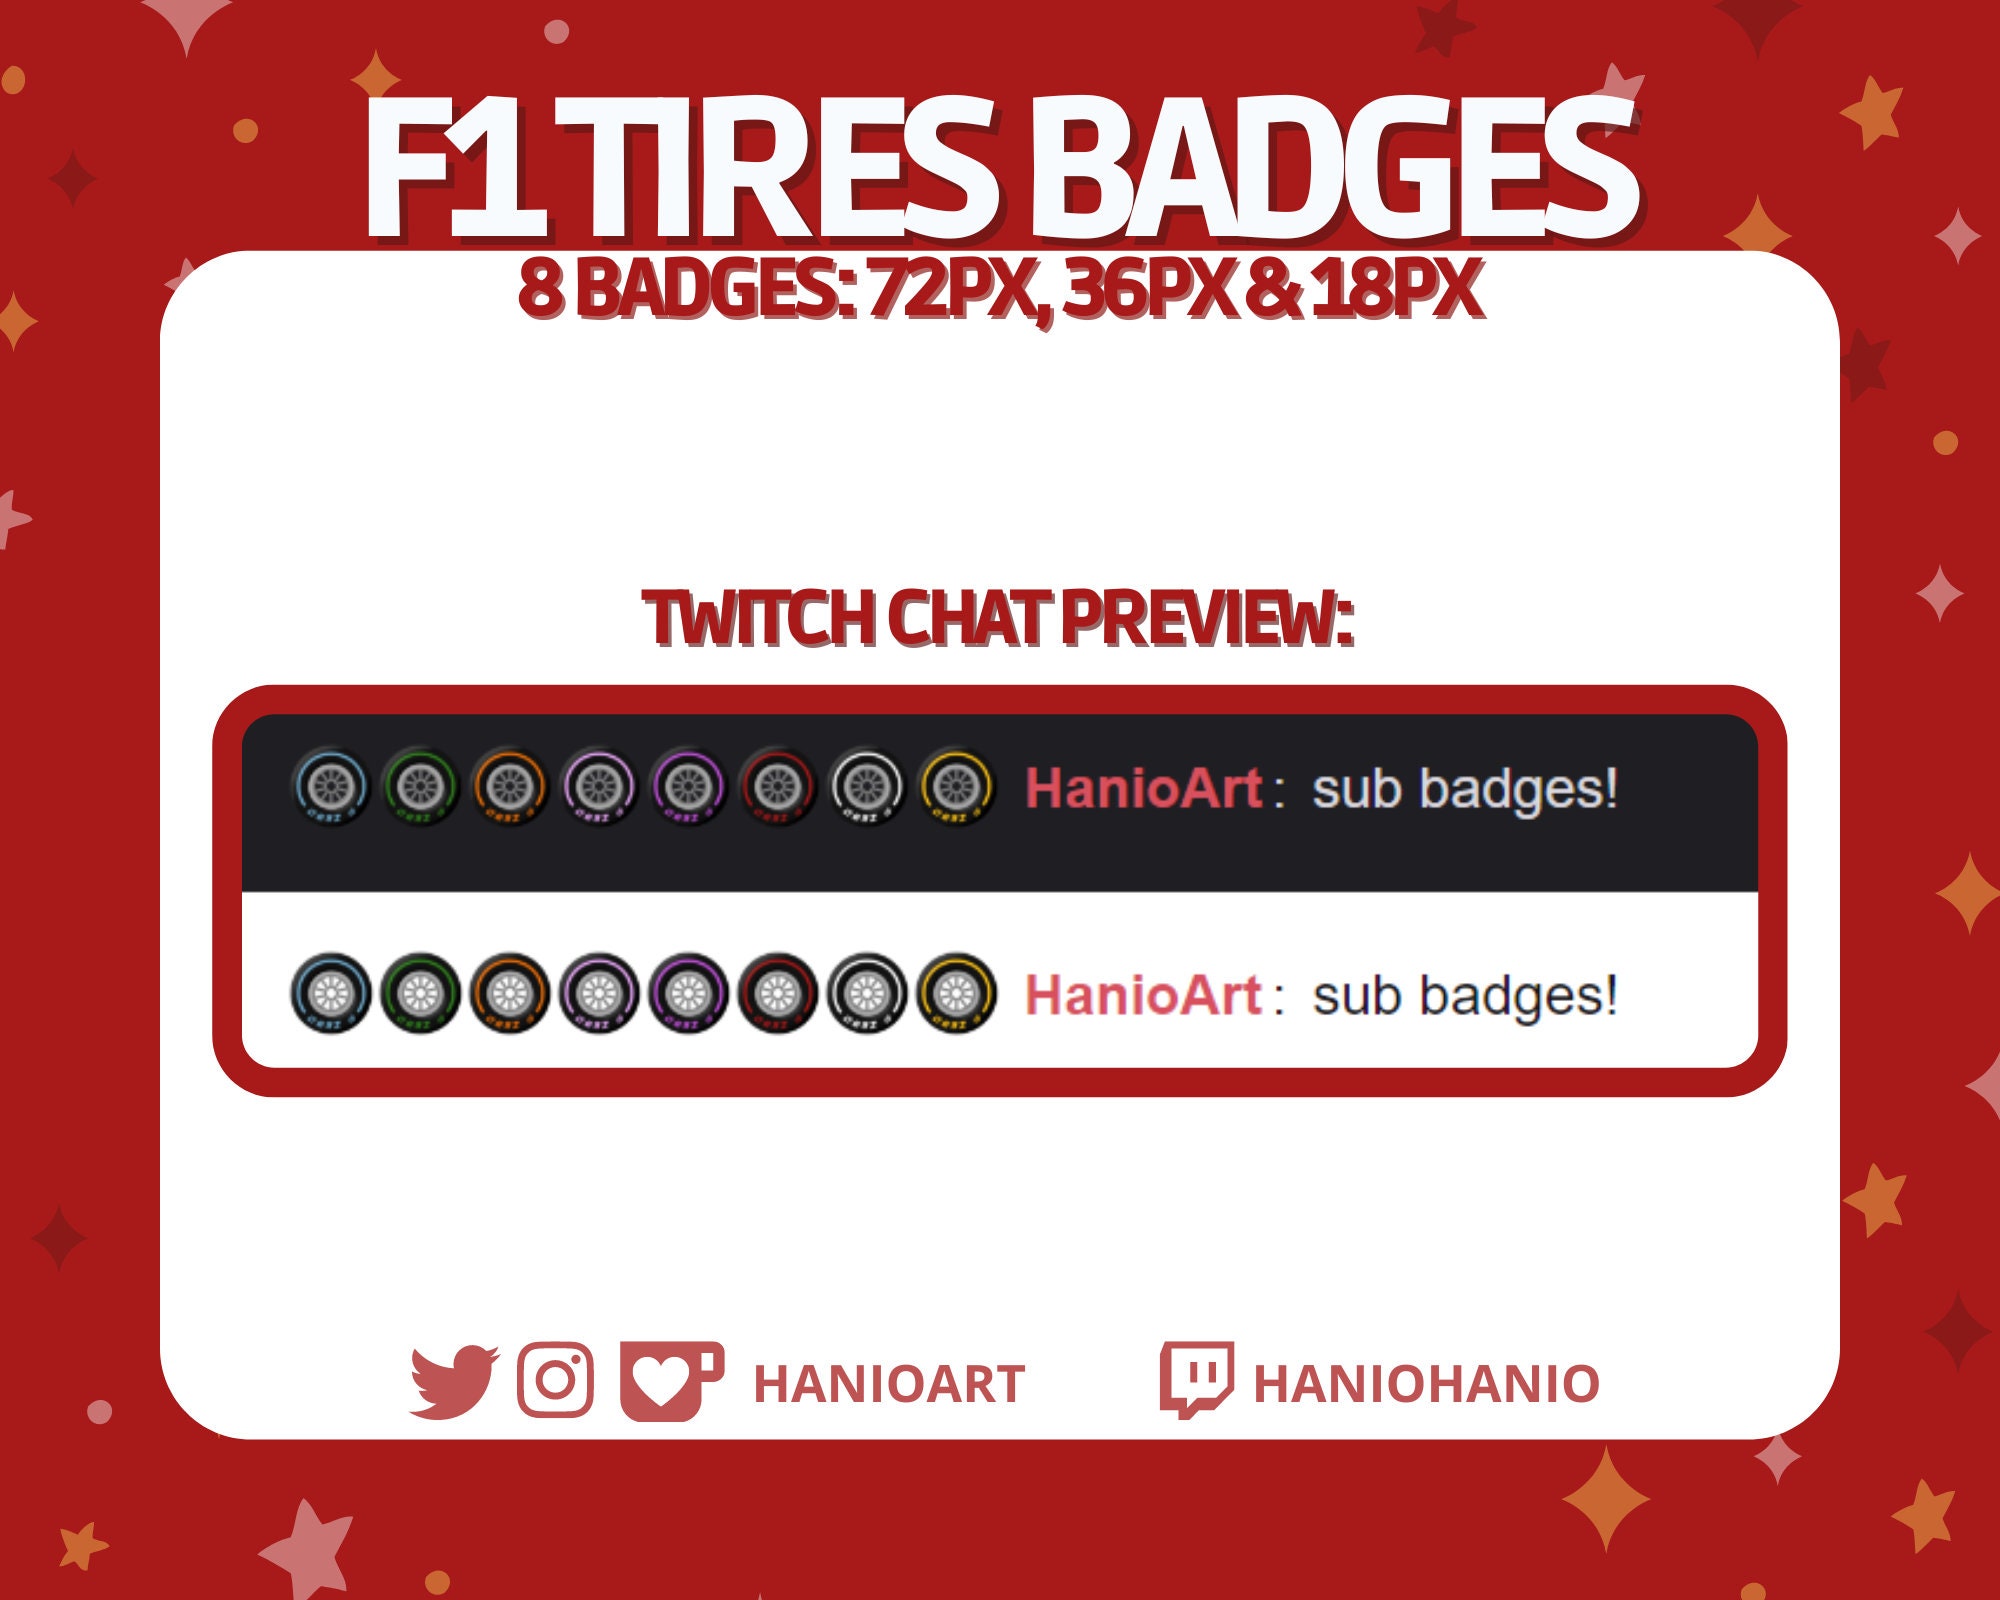 Formula 1 Tire Sub and Bit Badges for Twitch